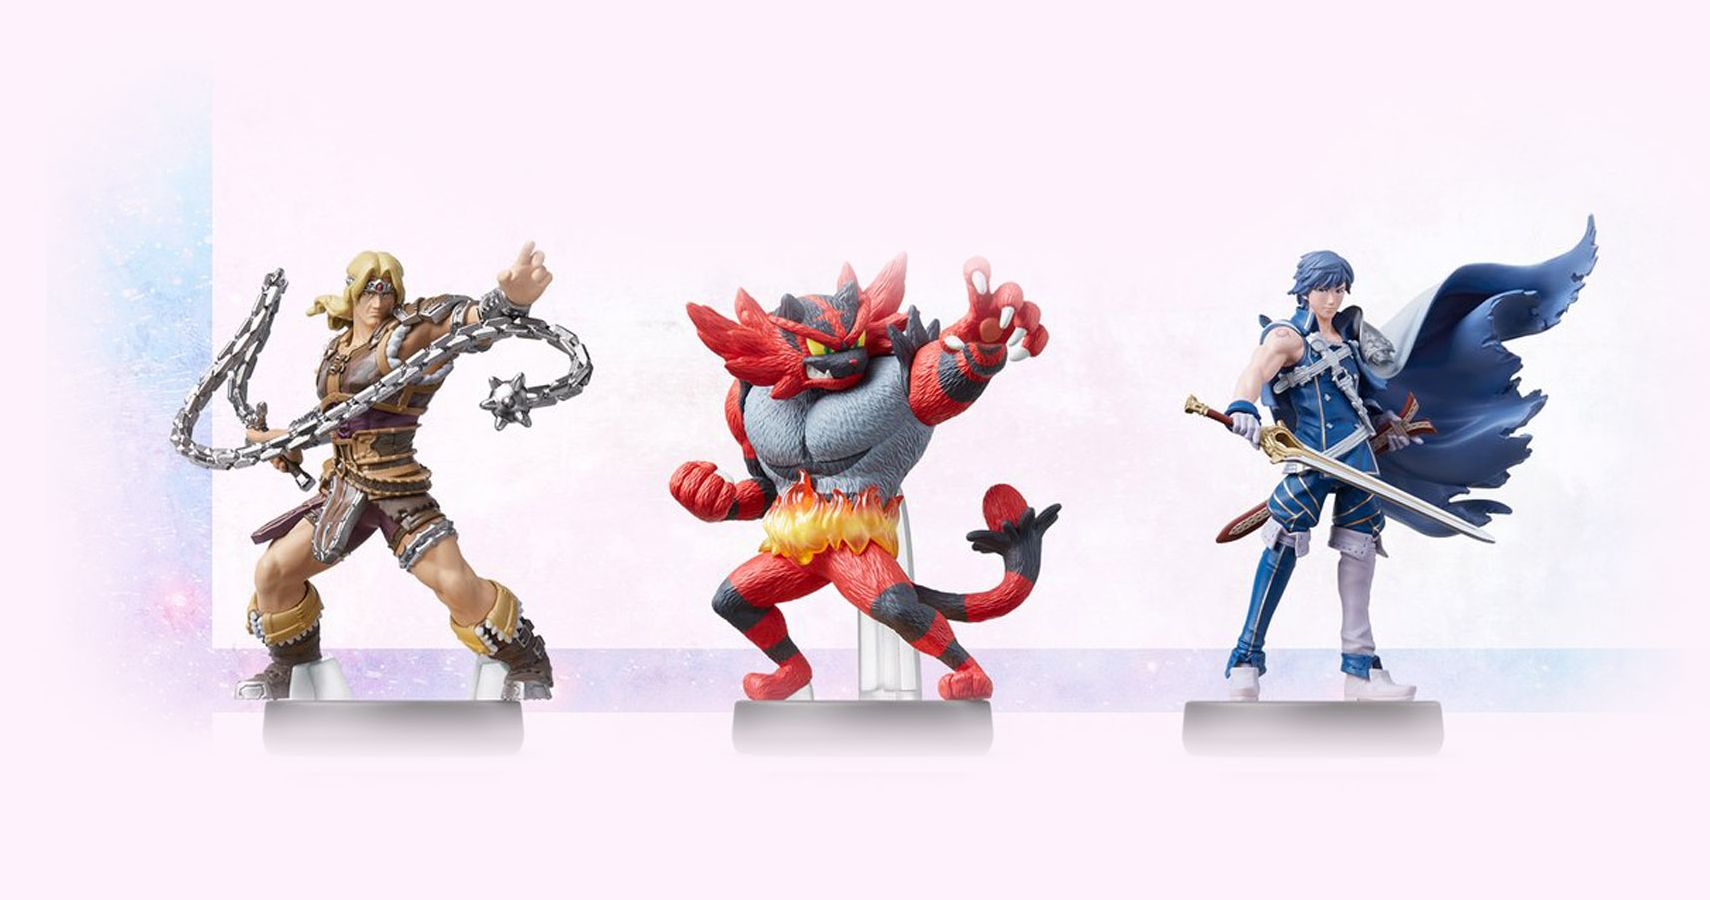 Incineroar Simon Belmont And Chrom Amiibo Are Up For PreOrder